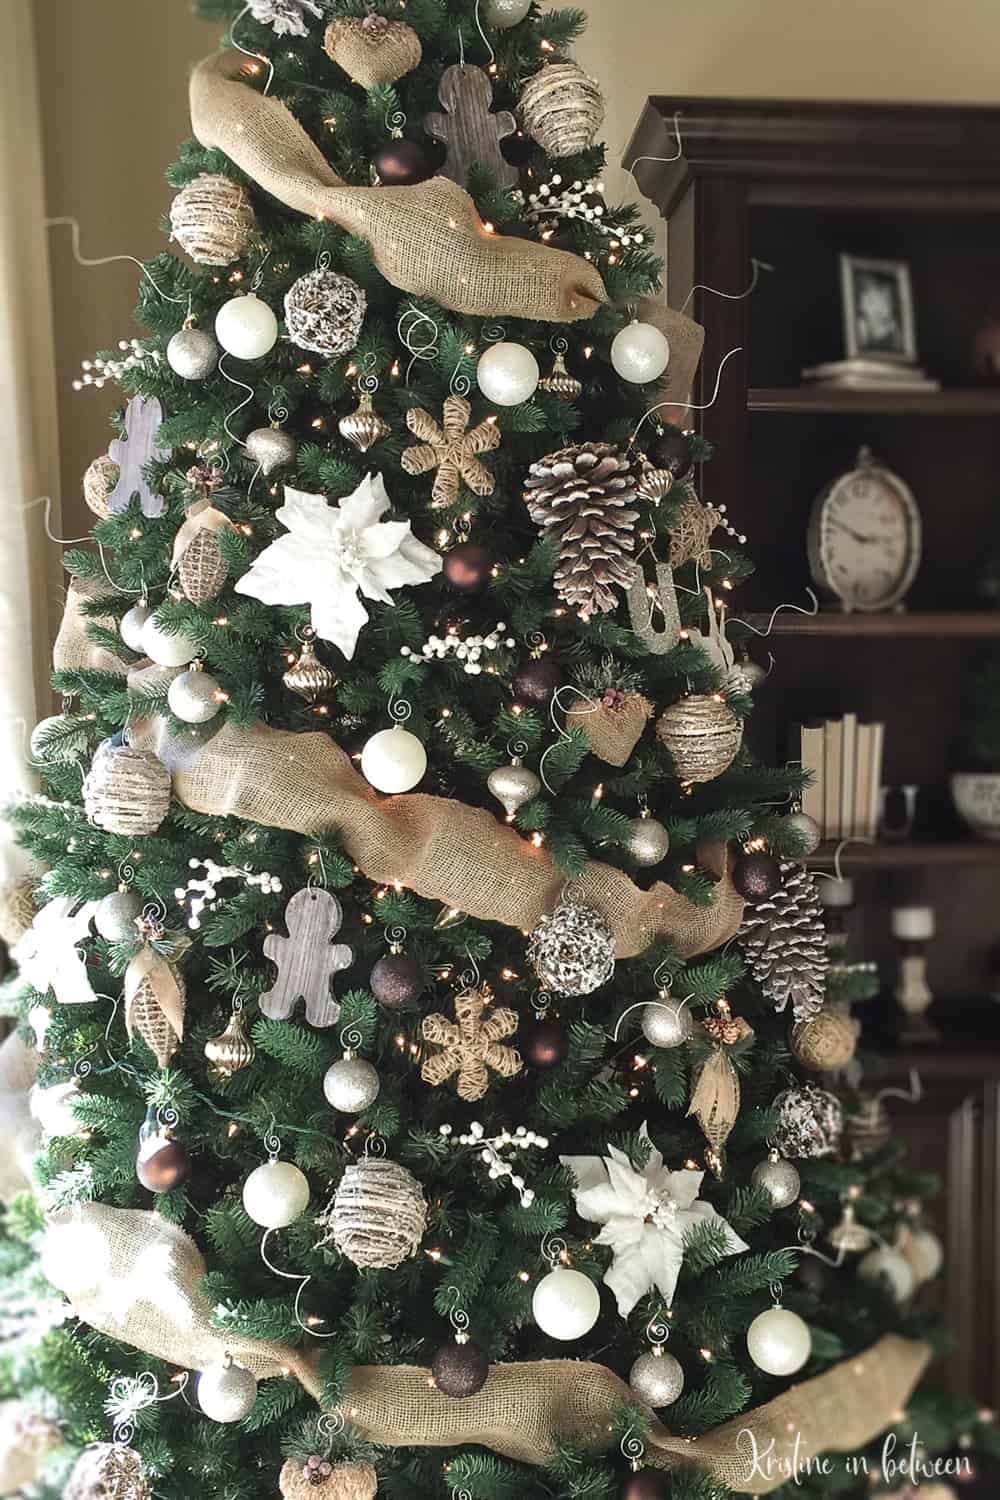 Holiday Charm | Best Way to Decorate Christmas Trees on a Budget: Inexpensive or Free & Easy Holiday Ornaments & Decorations